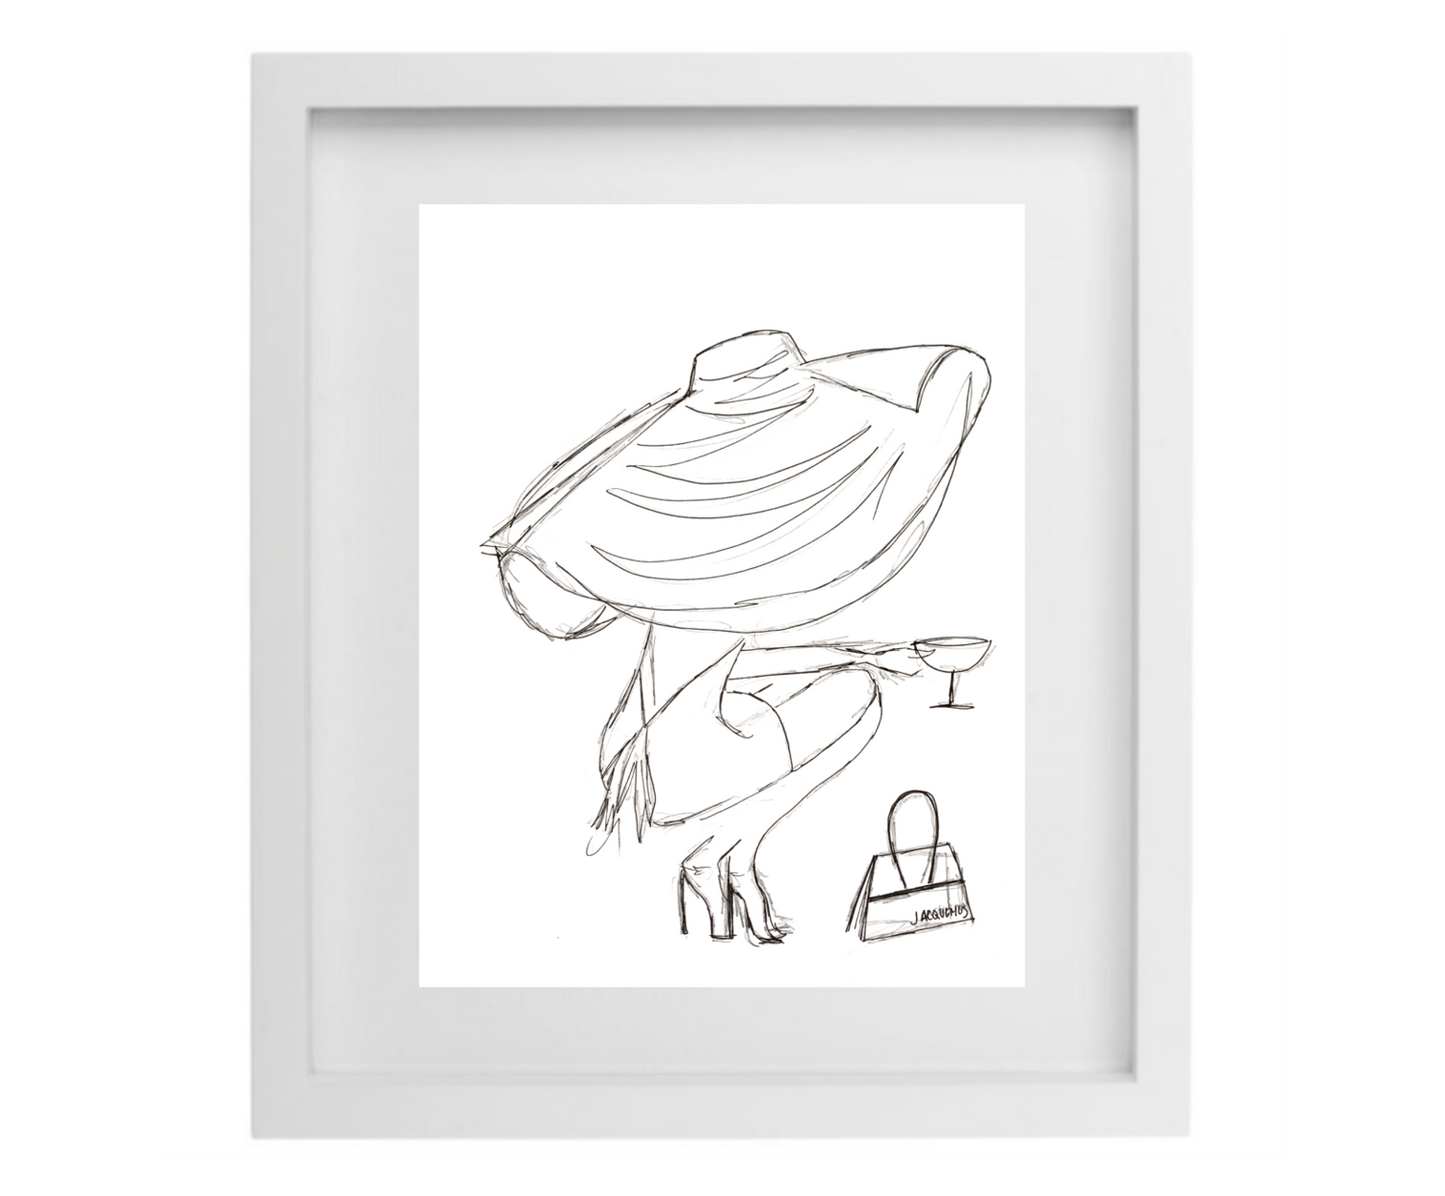 Big floppy sunhat black and white sketch in a white frame